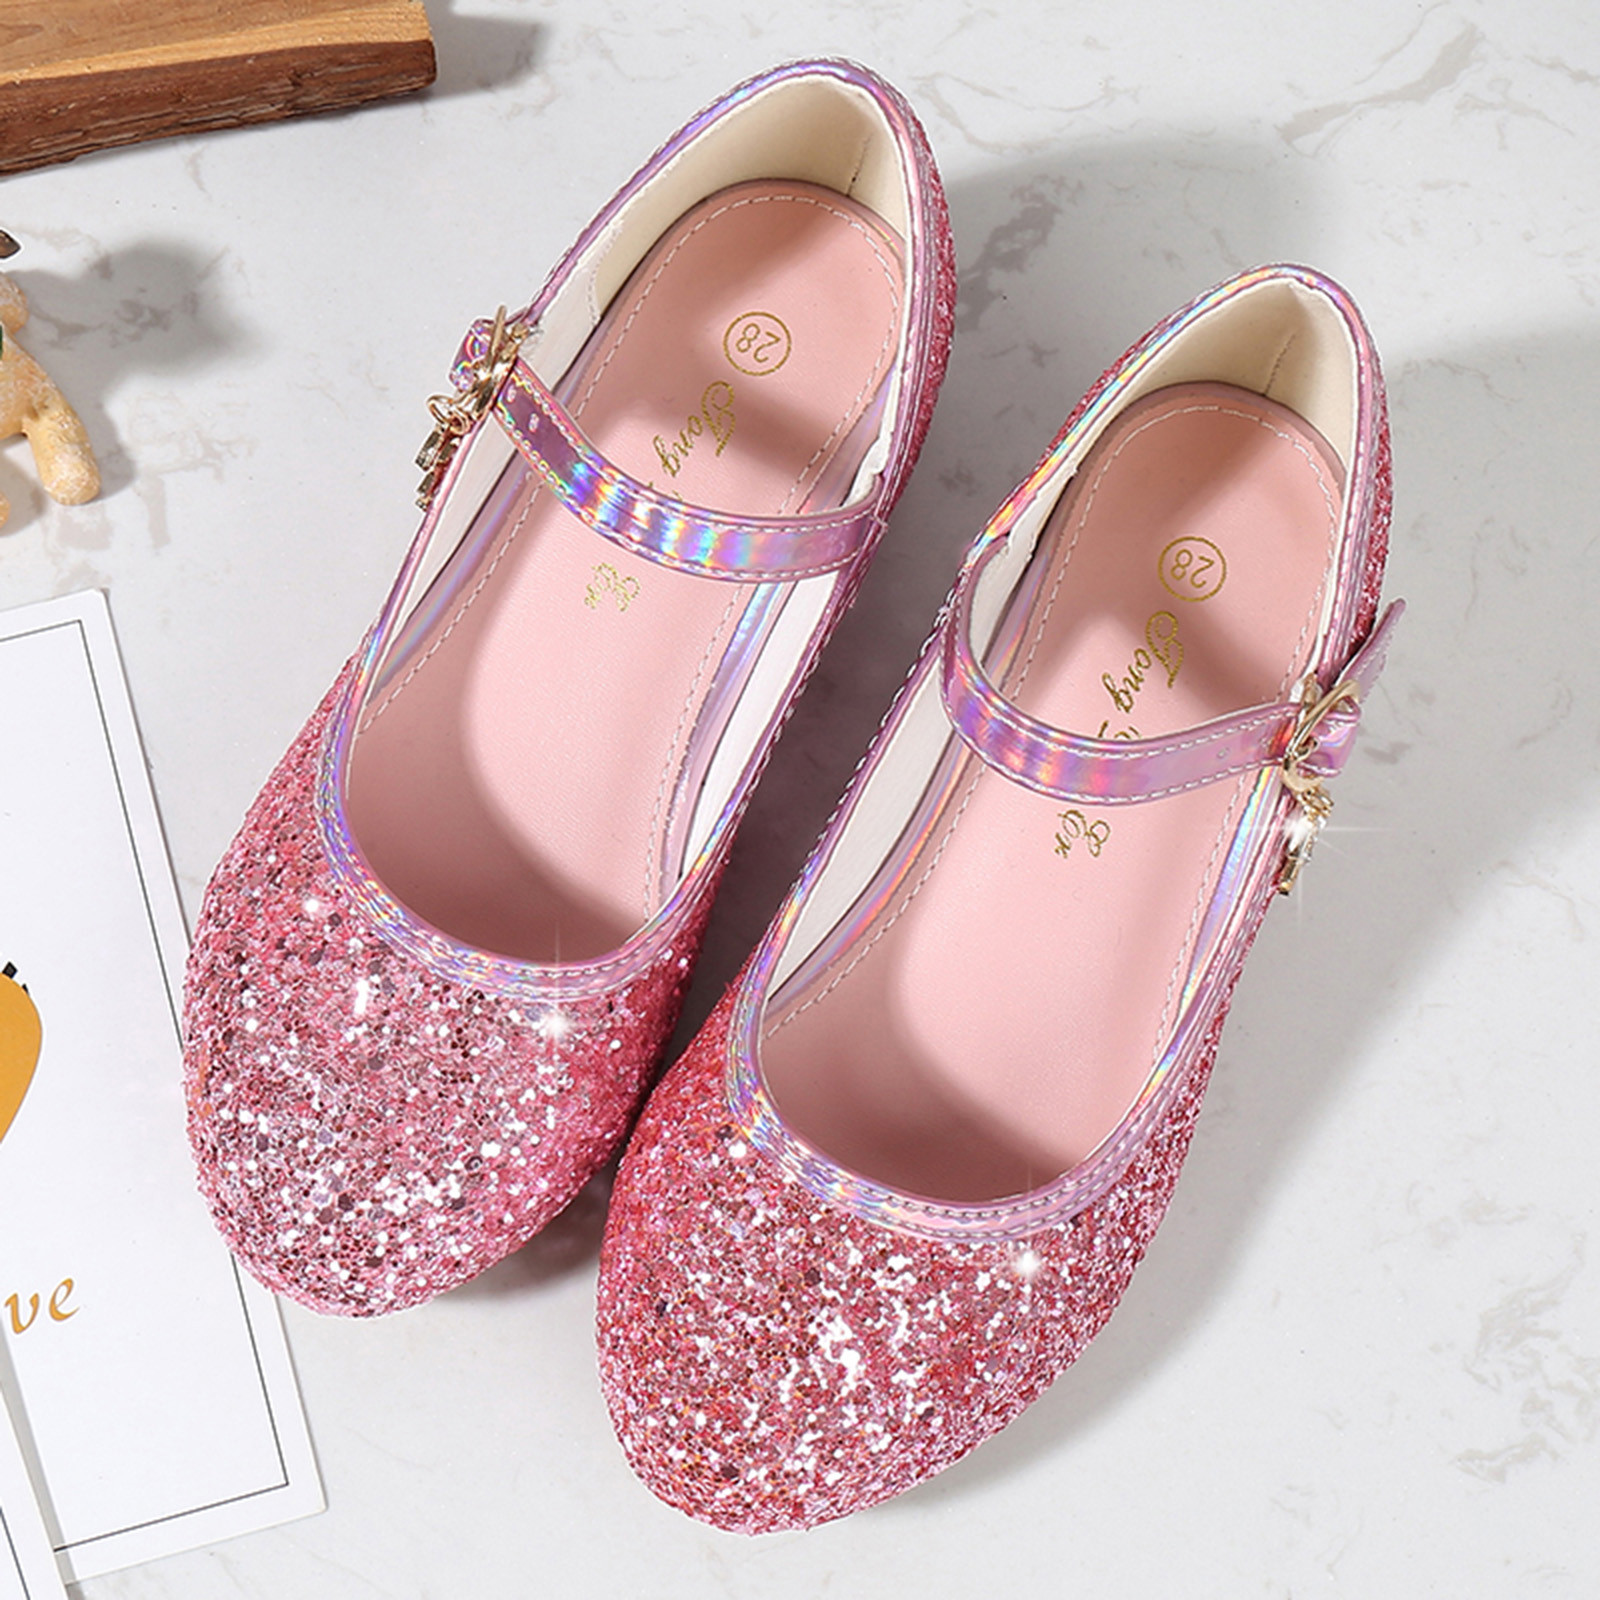 XINSHIDE Shoes Toddler Little Kid Girls Pumps Glitter Sequins Princess Low Heels Party Dance Shoes Rhinestone Sandals Baby Casual Shoes - image 4 of 4